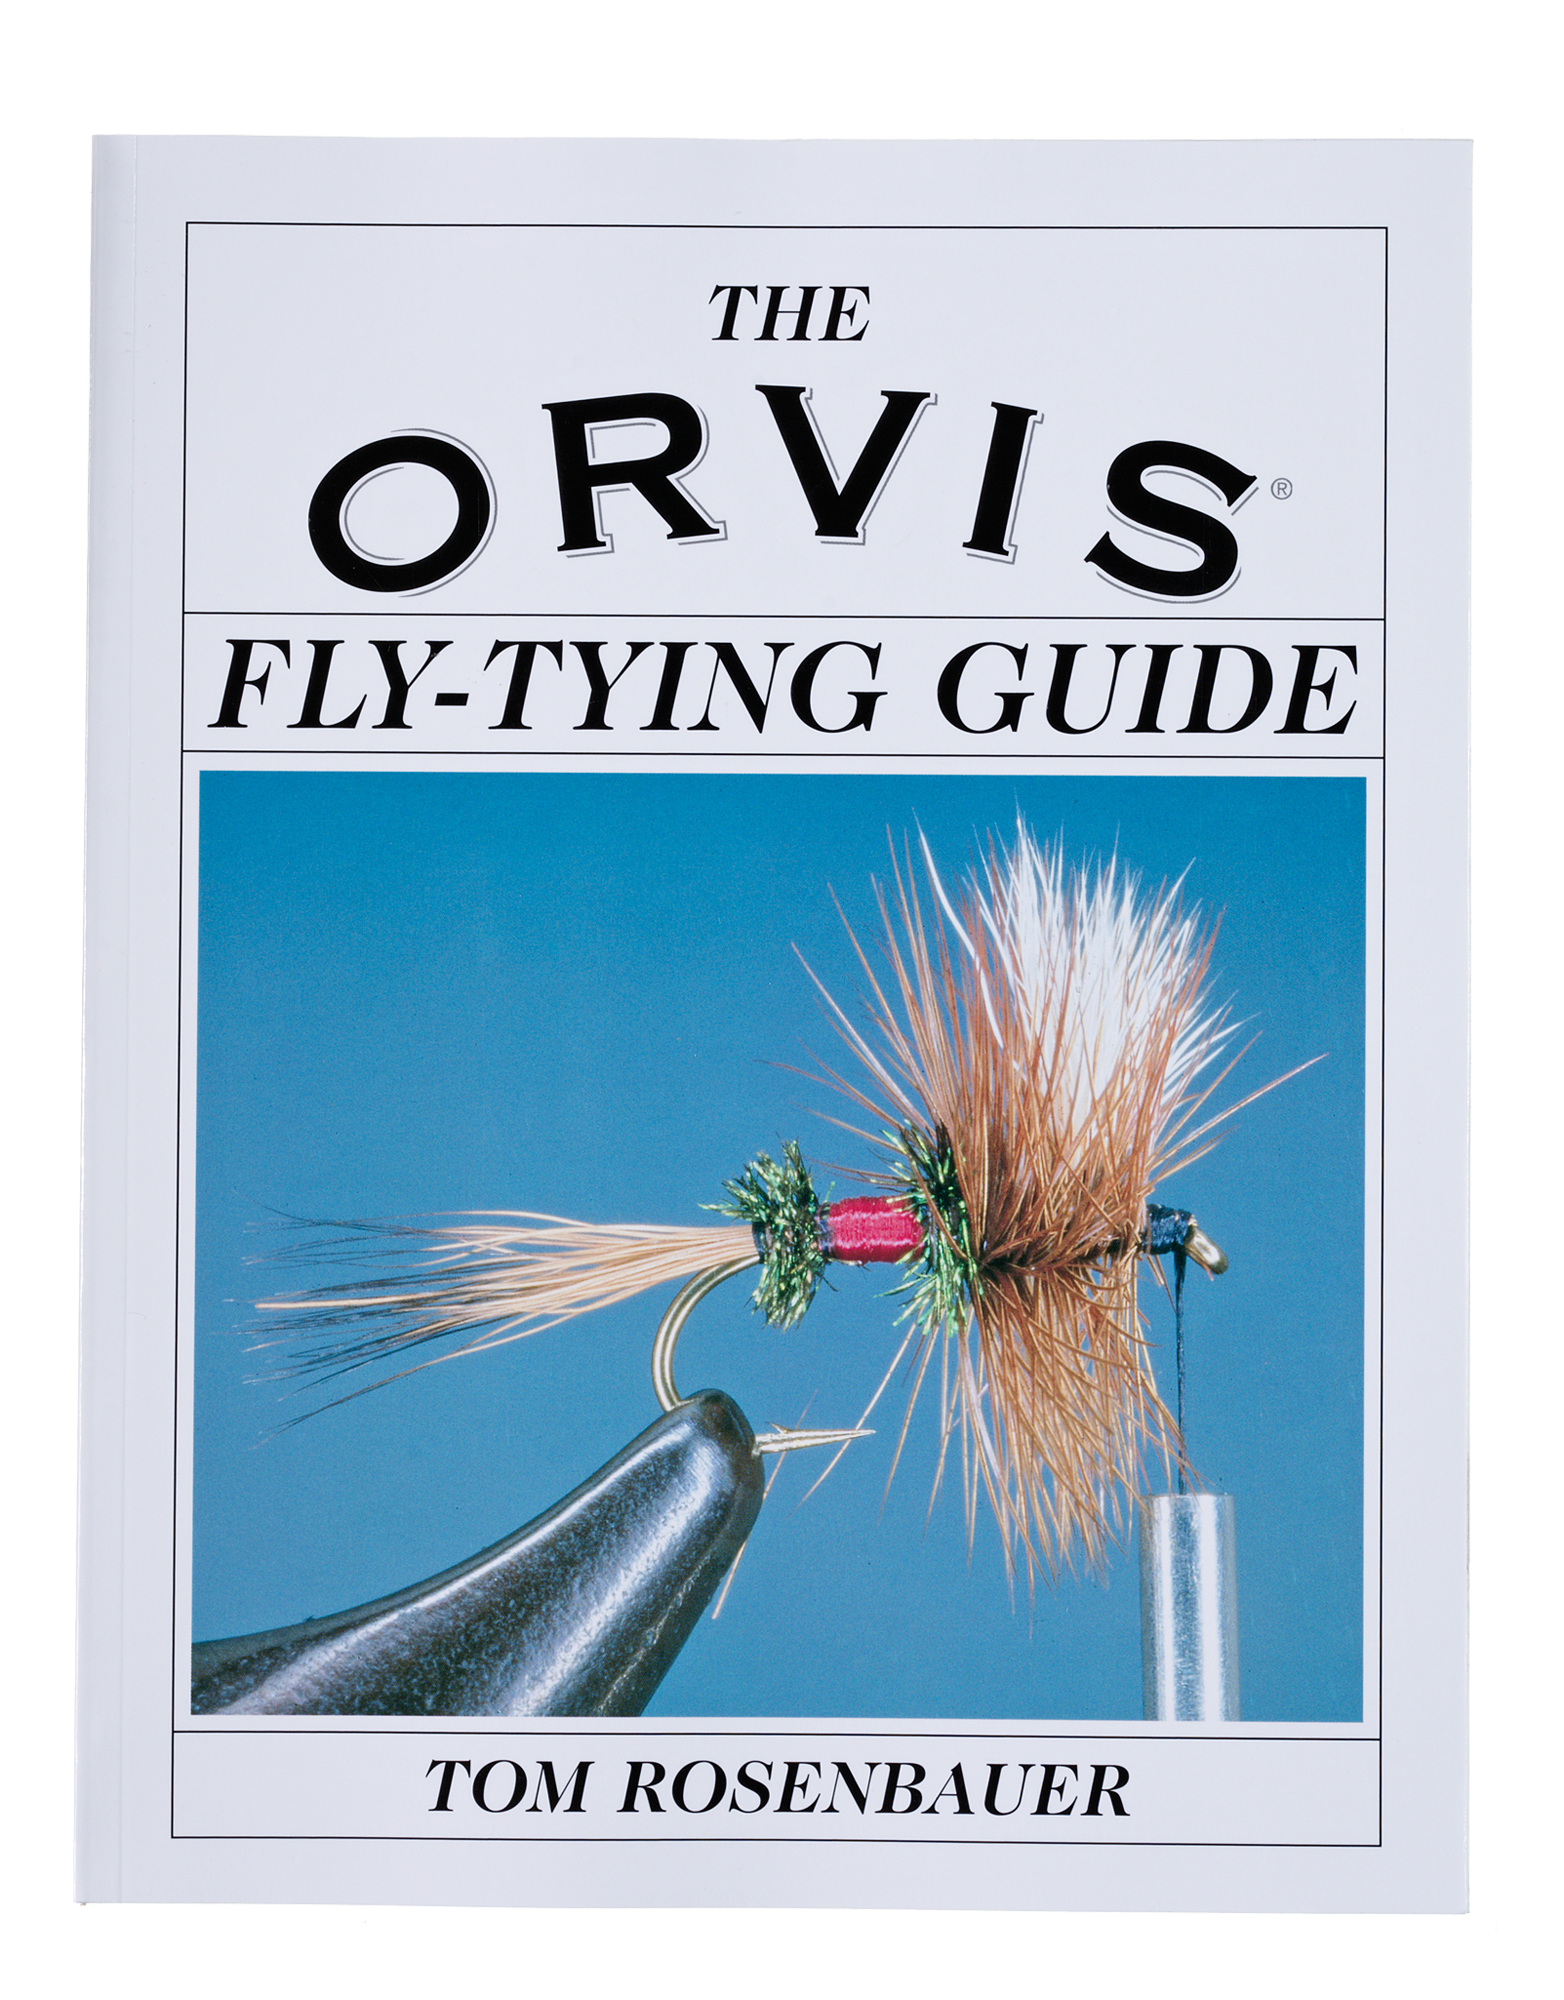 The Orvis Fly-Tying Guide Book by Tom Rosenbauer